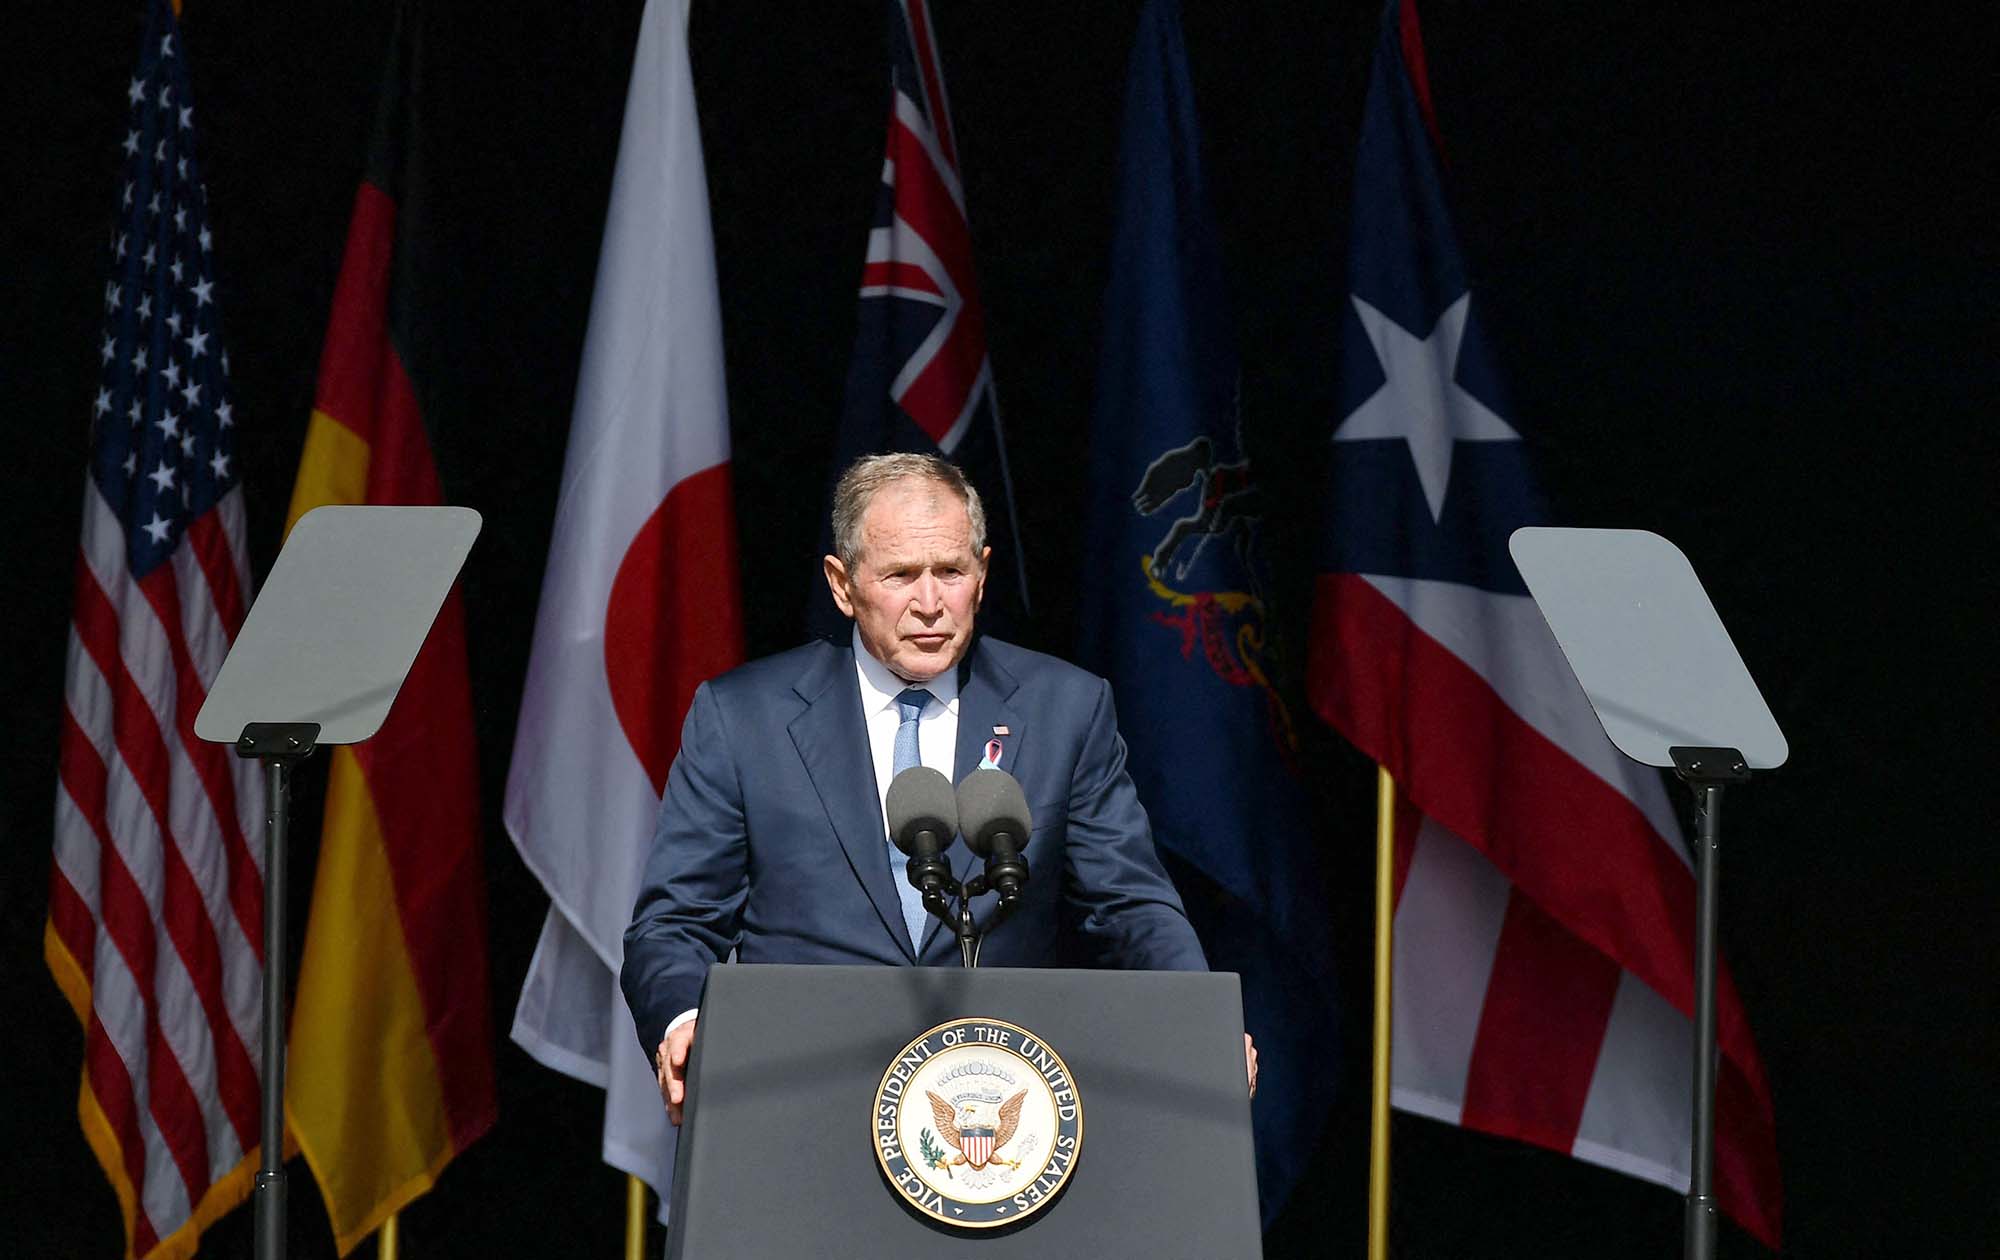 PHOTO: Former President George W. Bush speaks during a 9/11 commemoration at the Flight 93 National Memorial in Shanksville, Pa., Sept. 11, 2021.